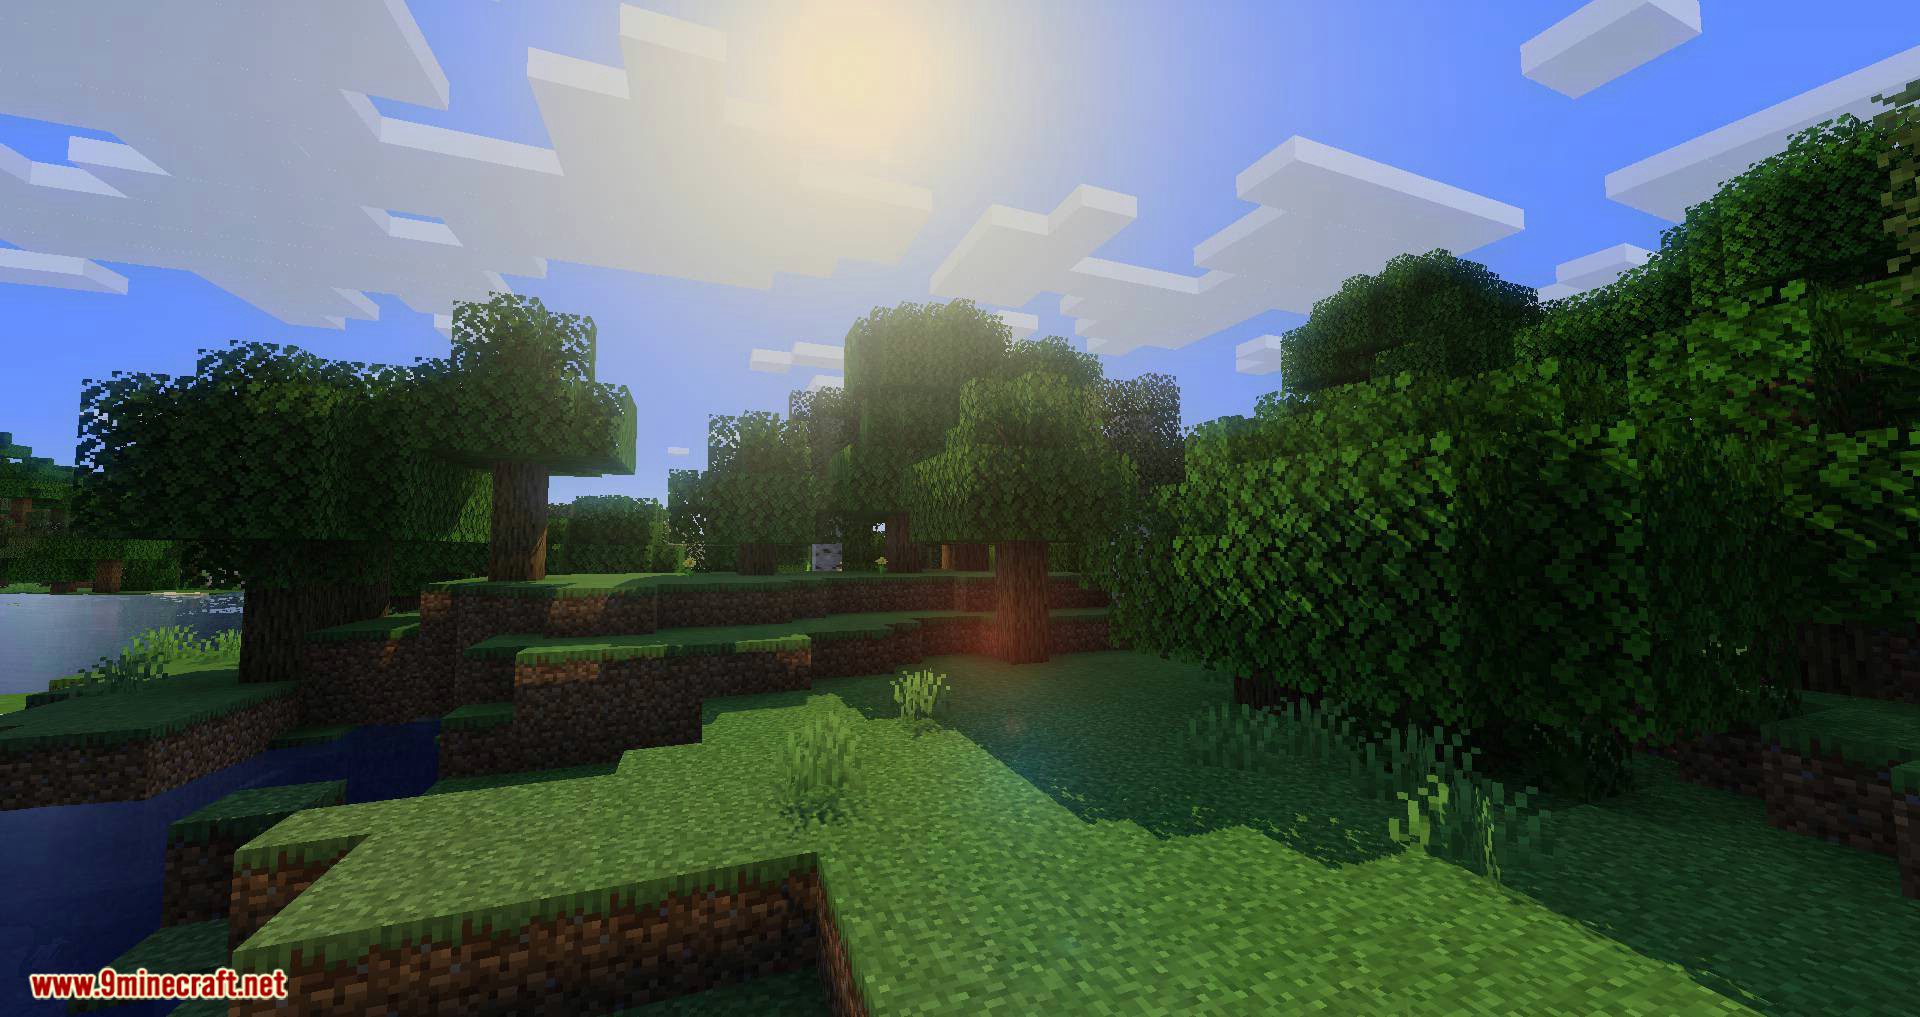 OptiForge Mod (1.17.1, 1.16.5) - Make OptiFine Compatible with Minecraft Forge 10